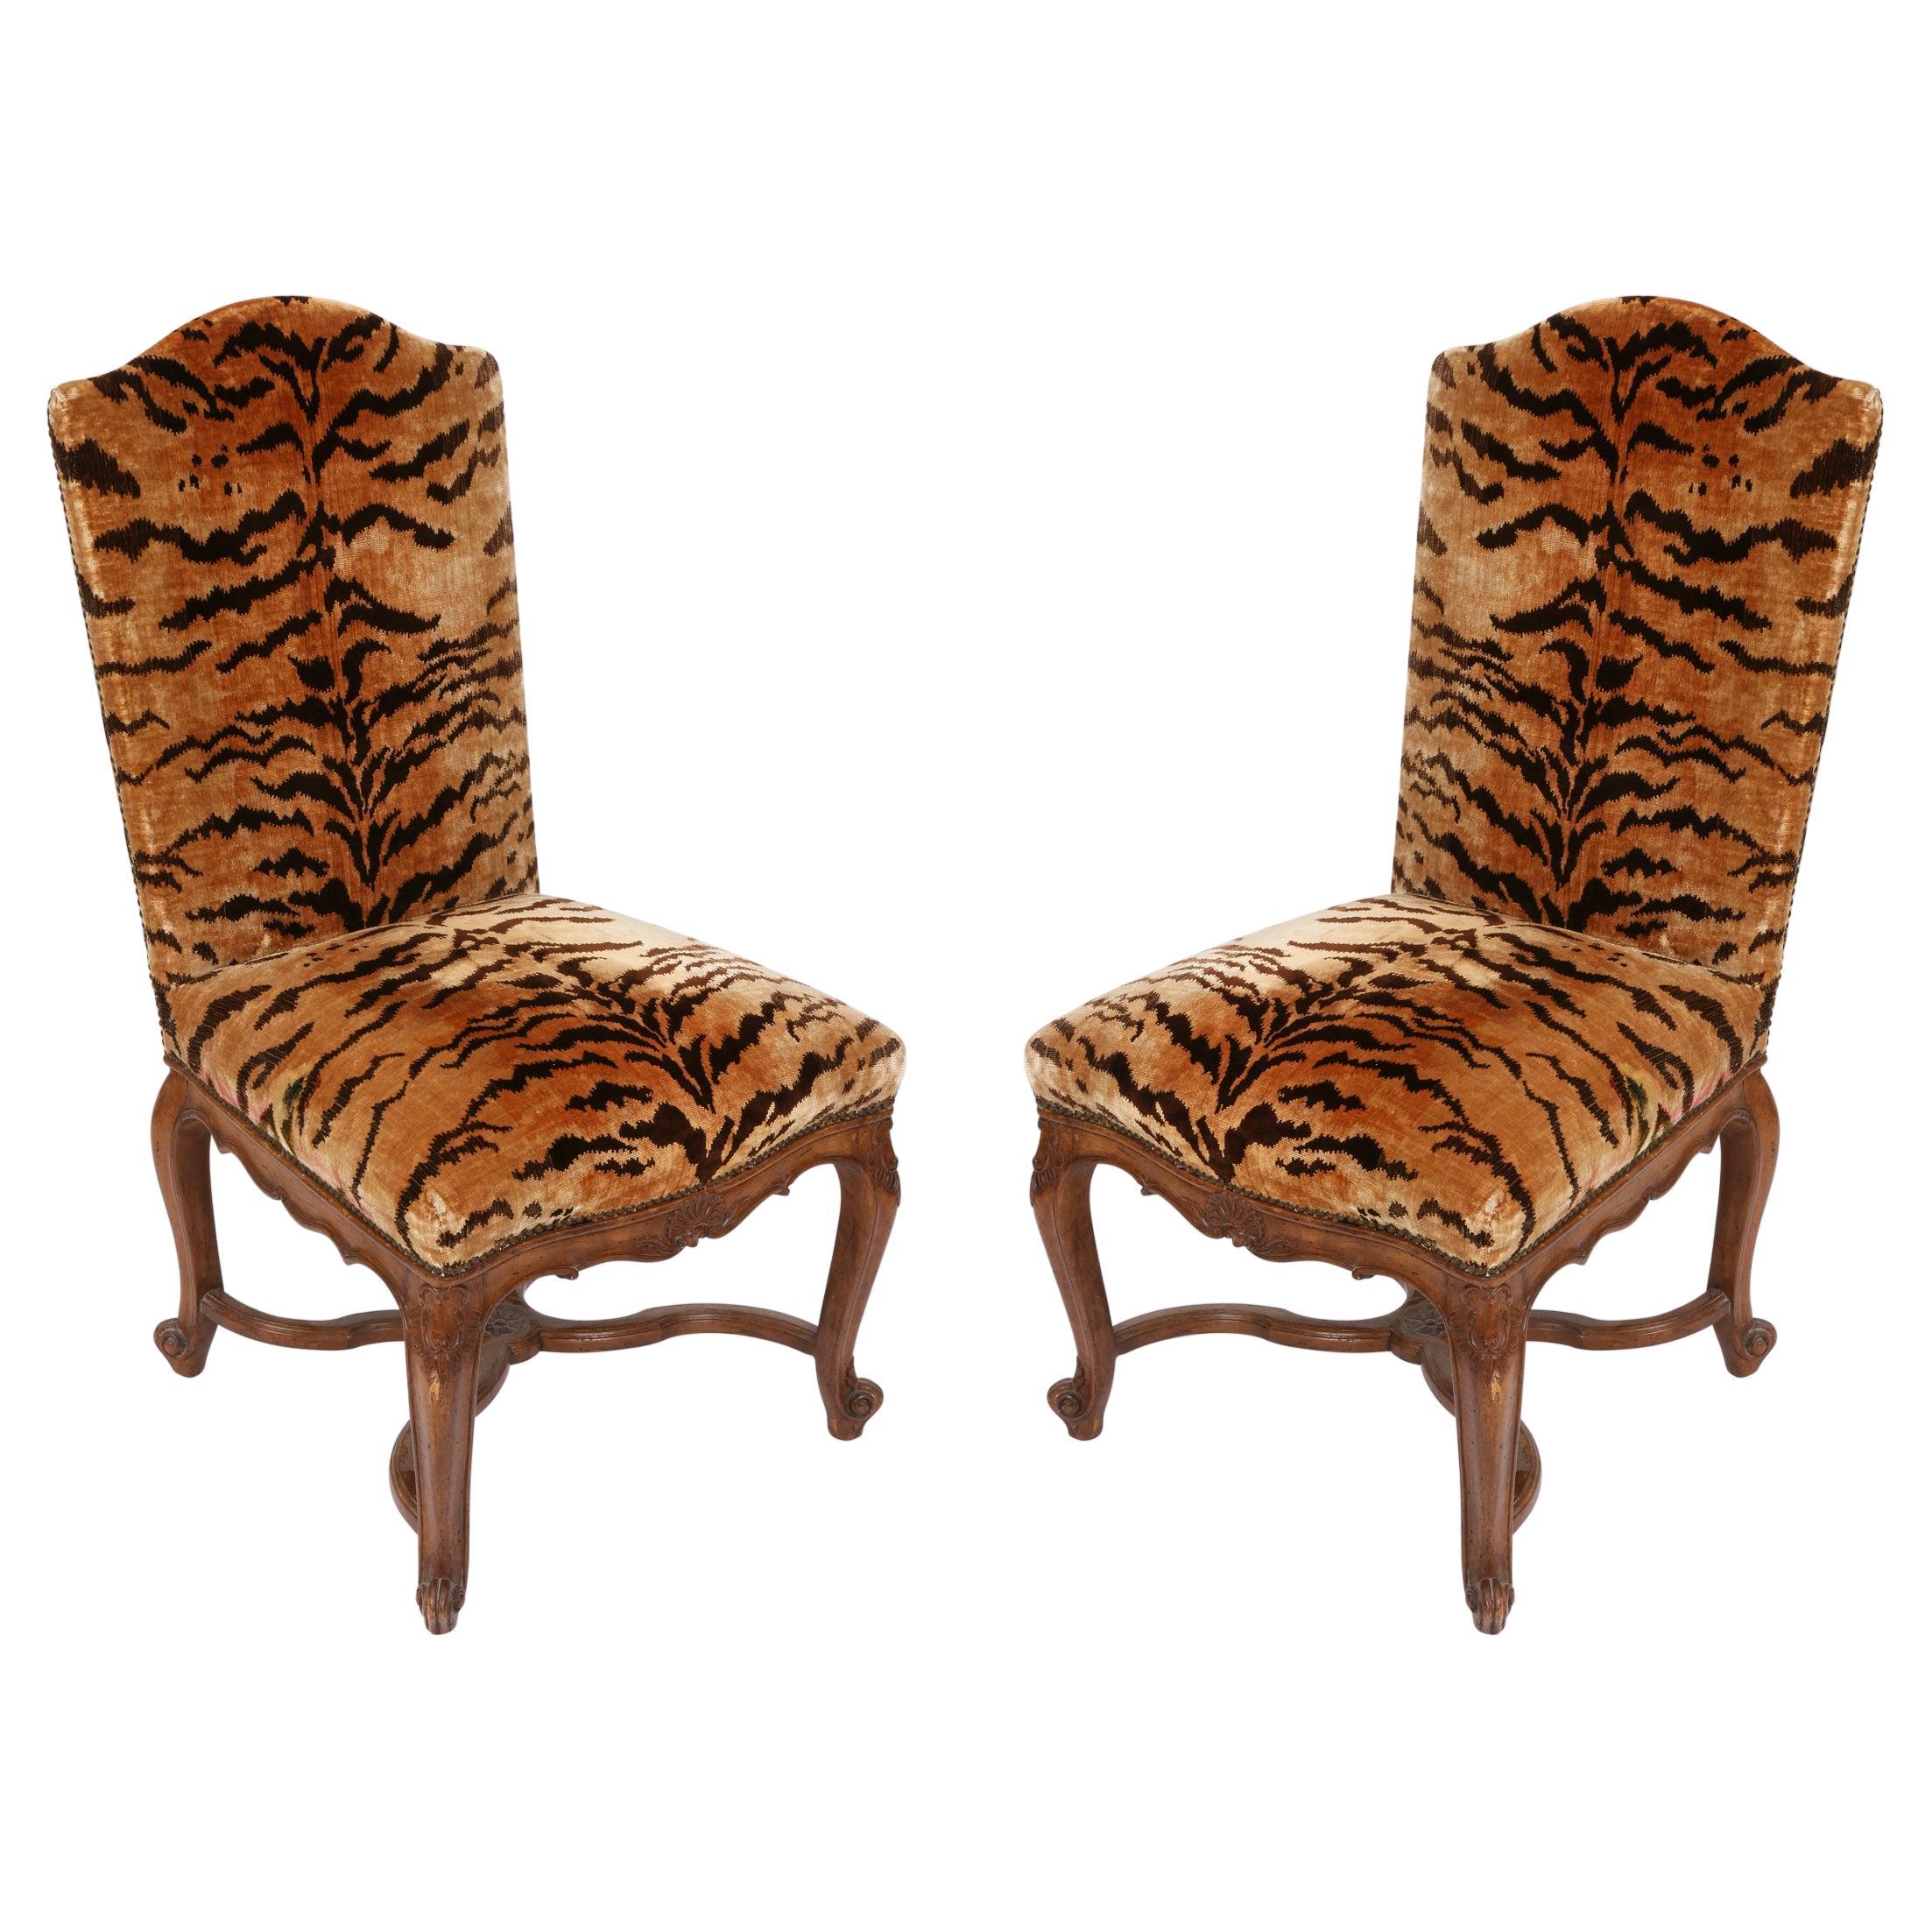 Pair of Vintage Regence Style Walnut Side Chairs in Silk Tiger Velvet For Sale